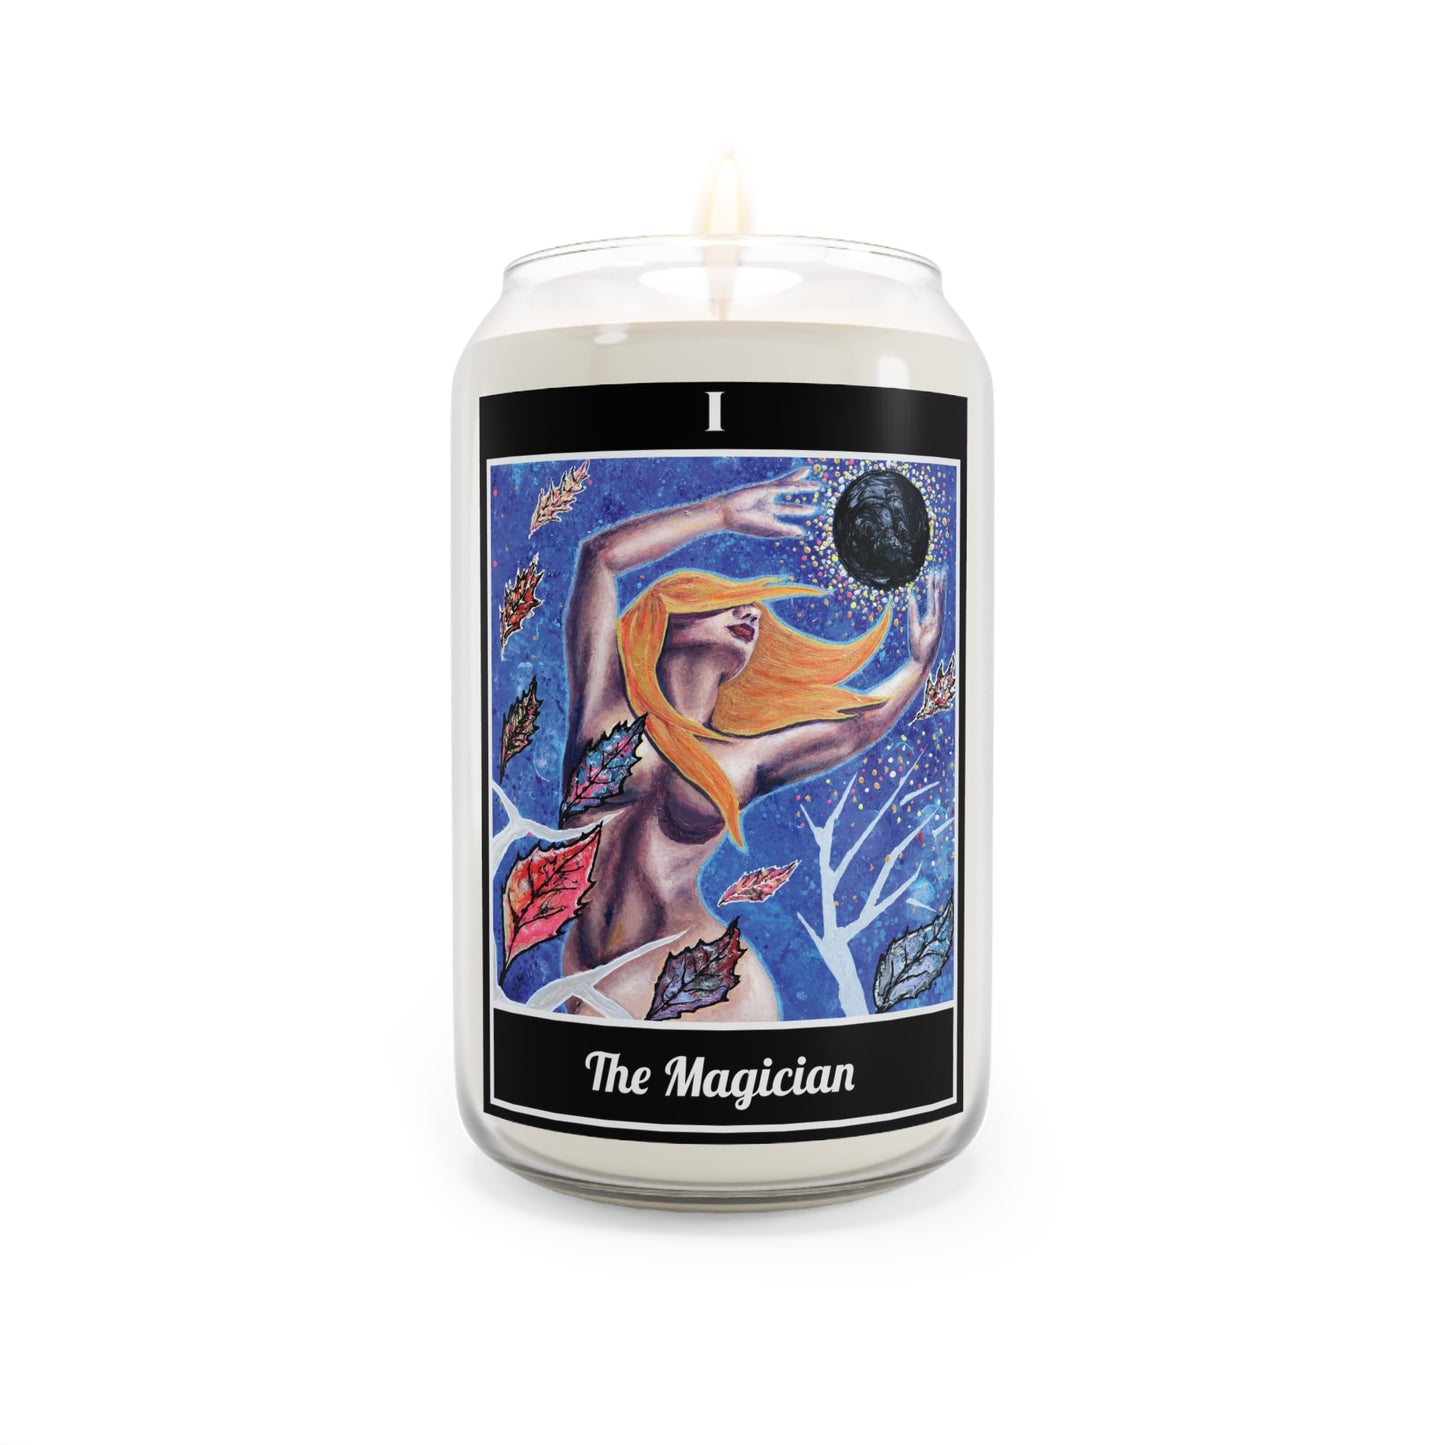 The Magician Tarot Card Scented Candle, 13.75oz